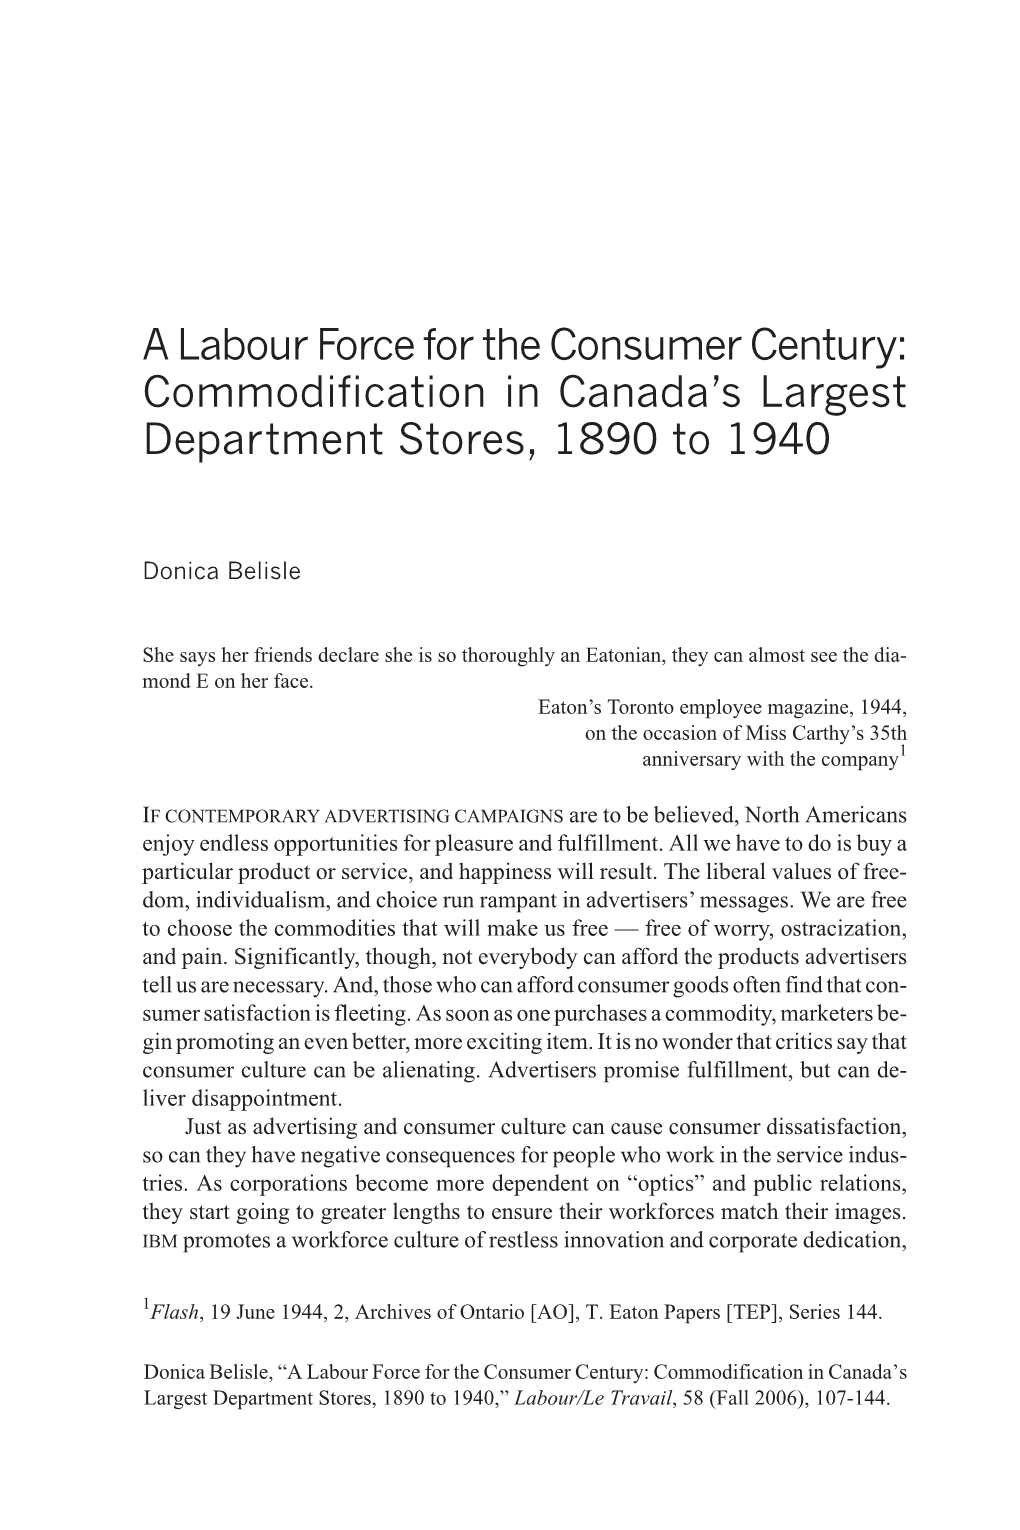 Commodification in Canada's Largest Department Stores, 1890 to 1940